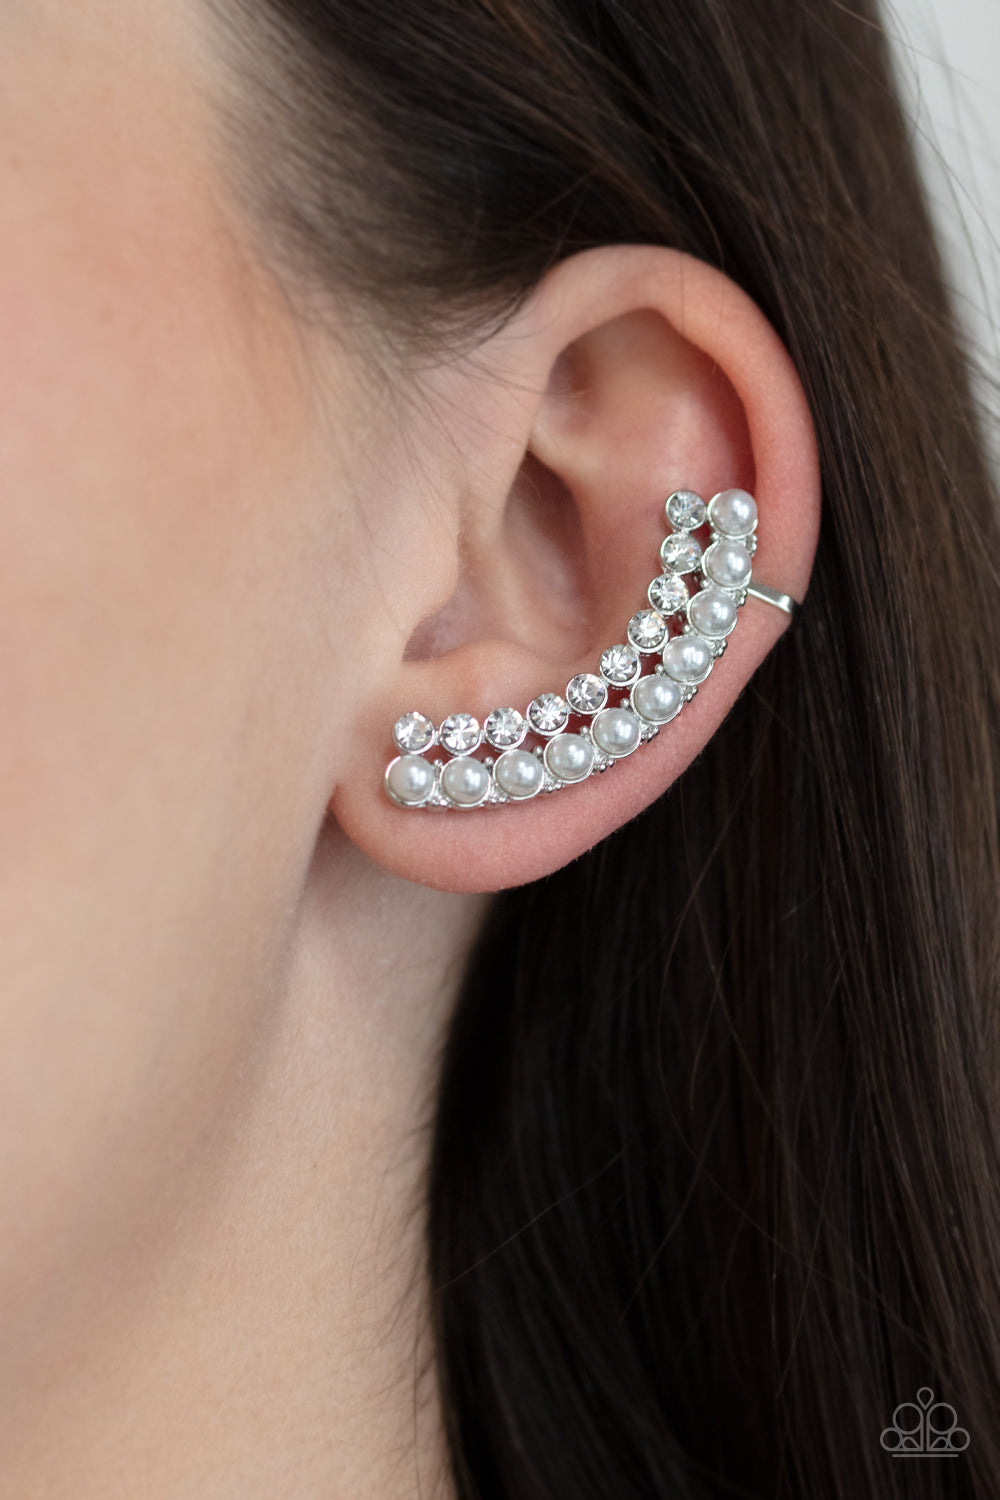 Doubled Down On Dazzle - white - Paparazzi earrings